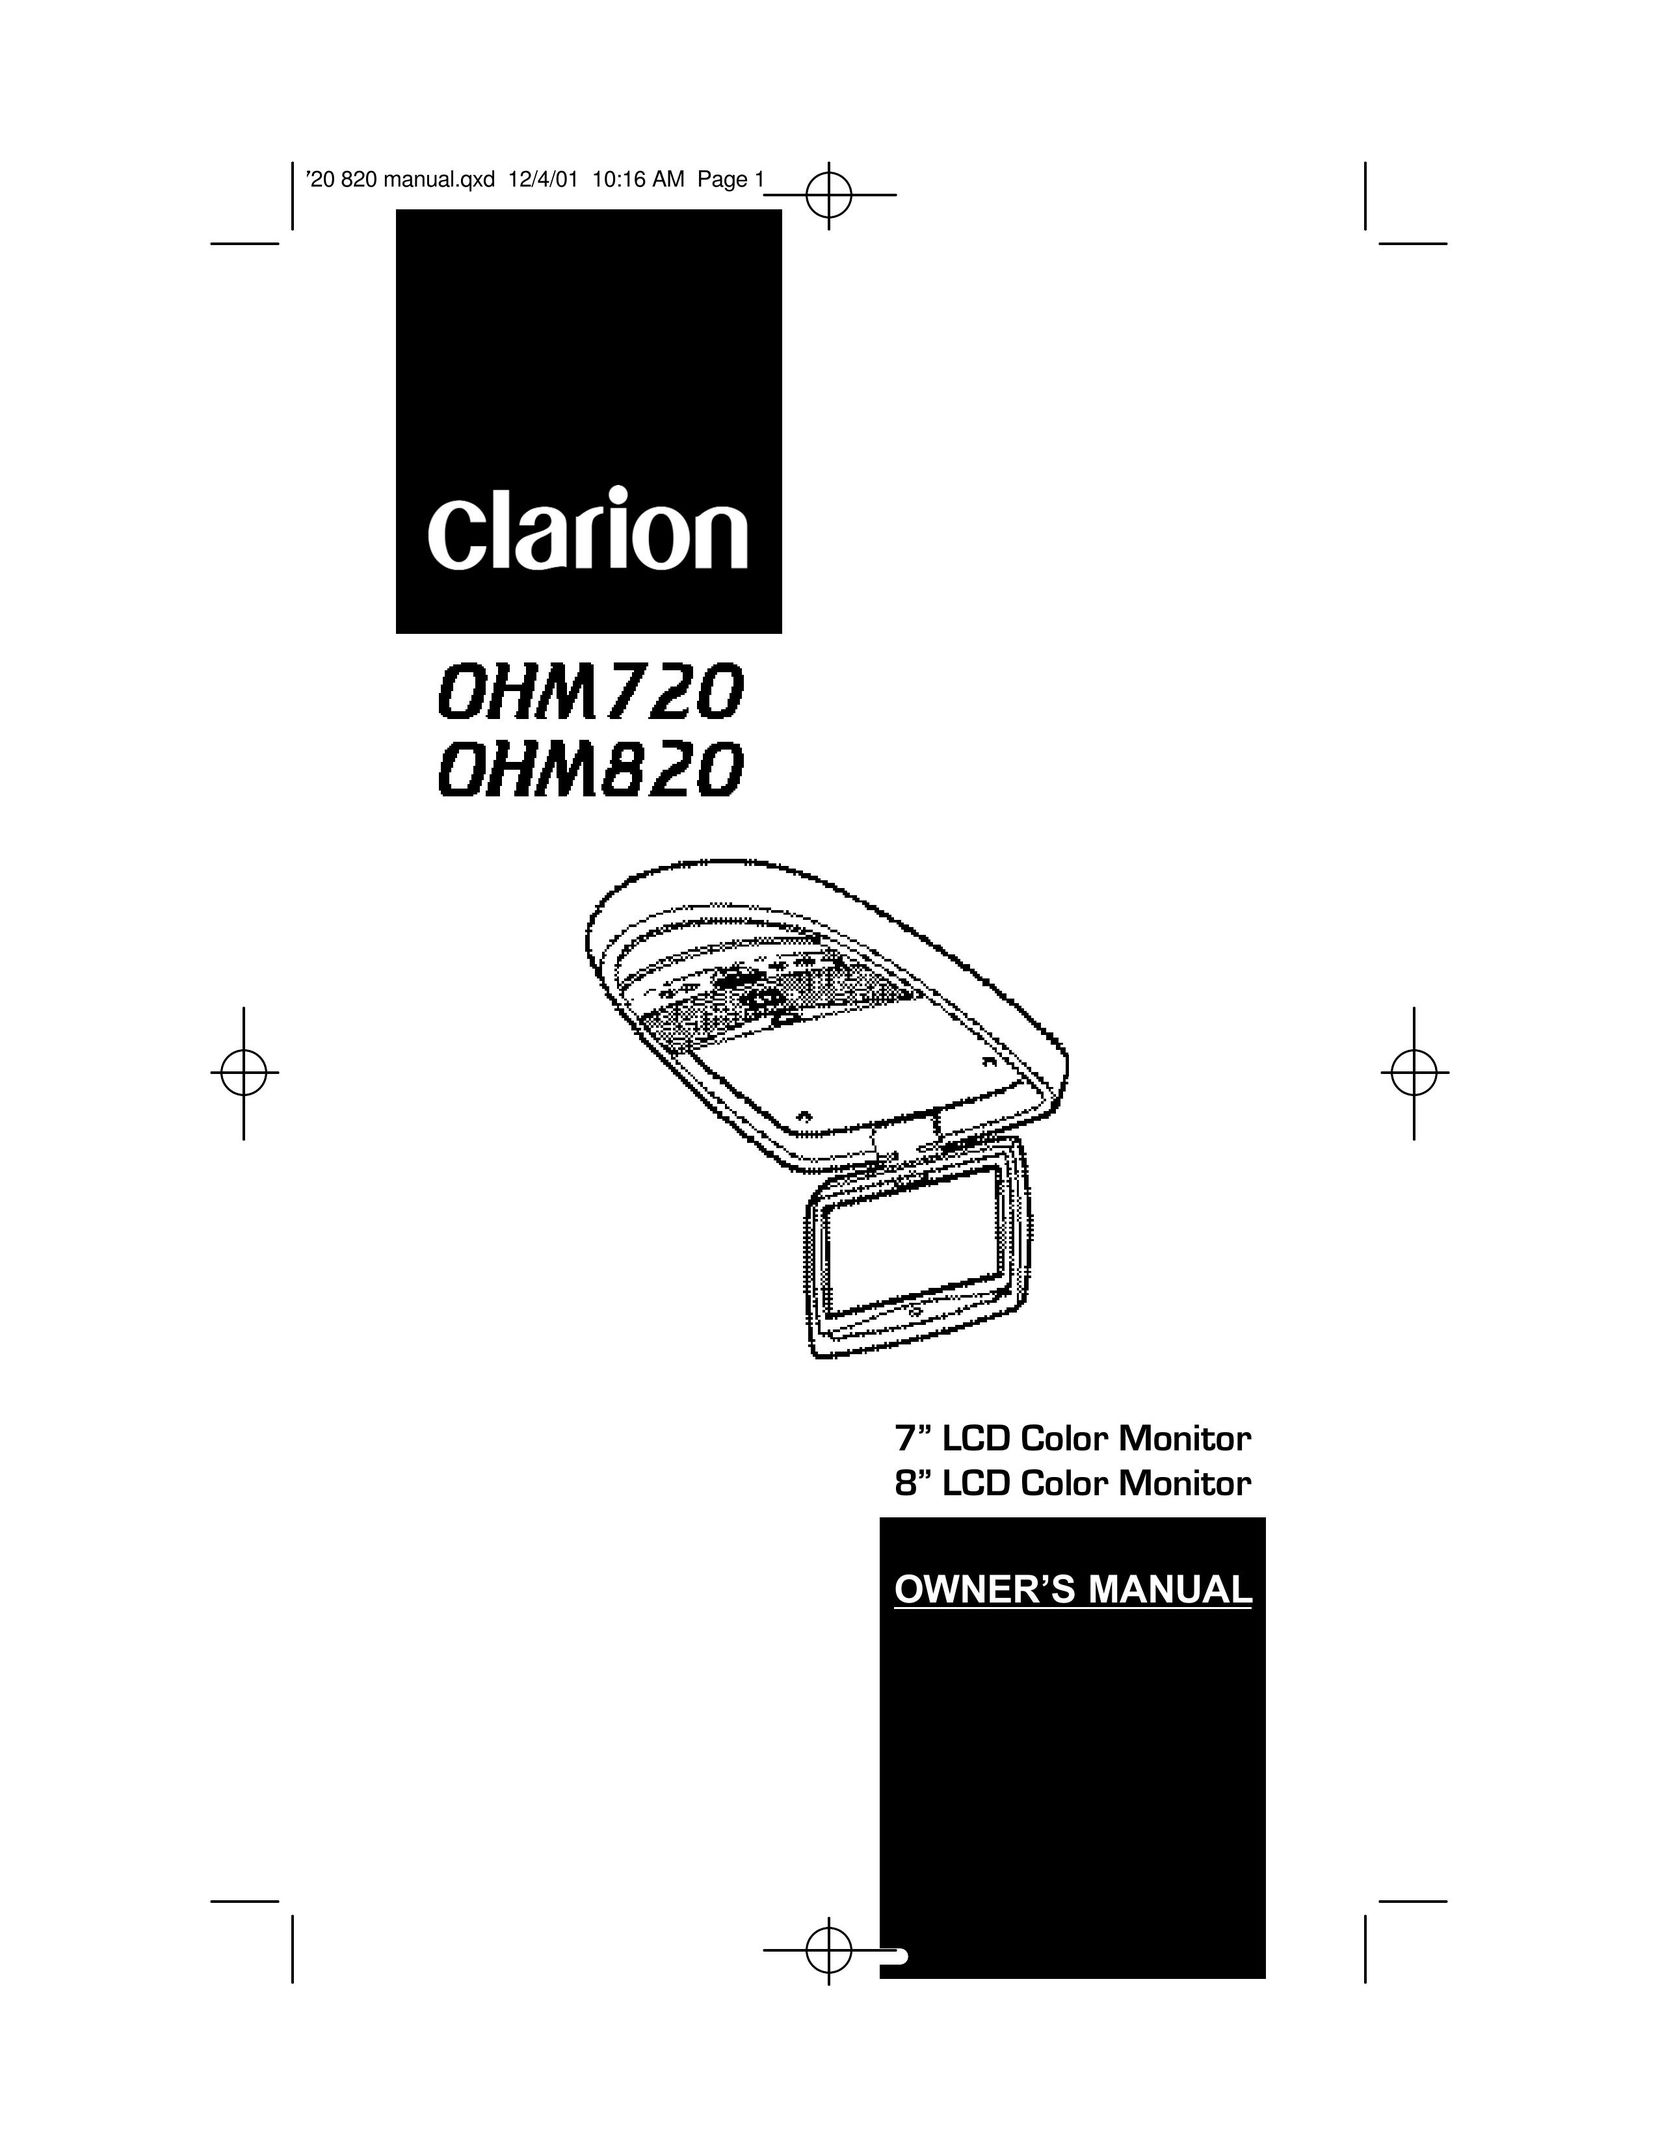 Clarion OHM720 Computer Monitor User Manual